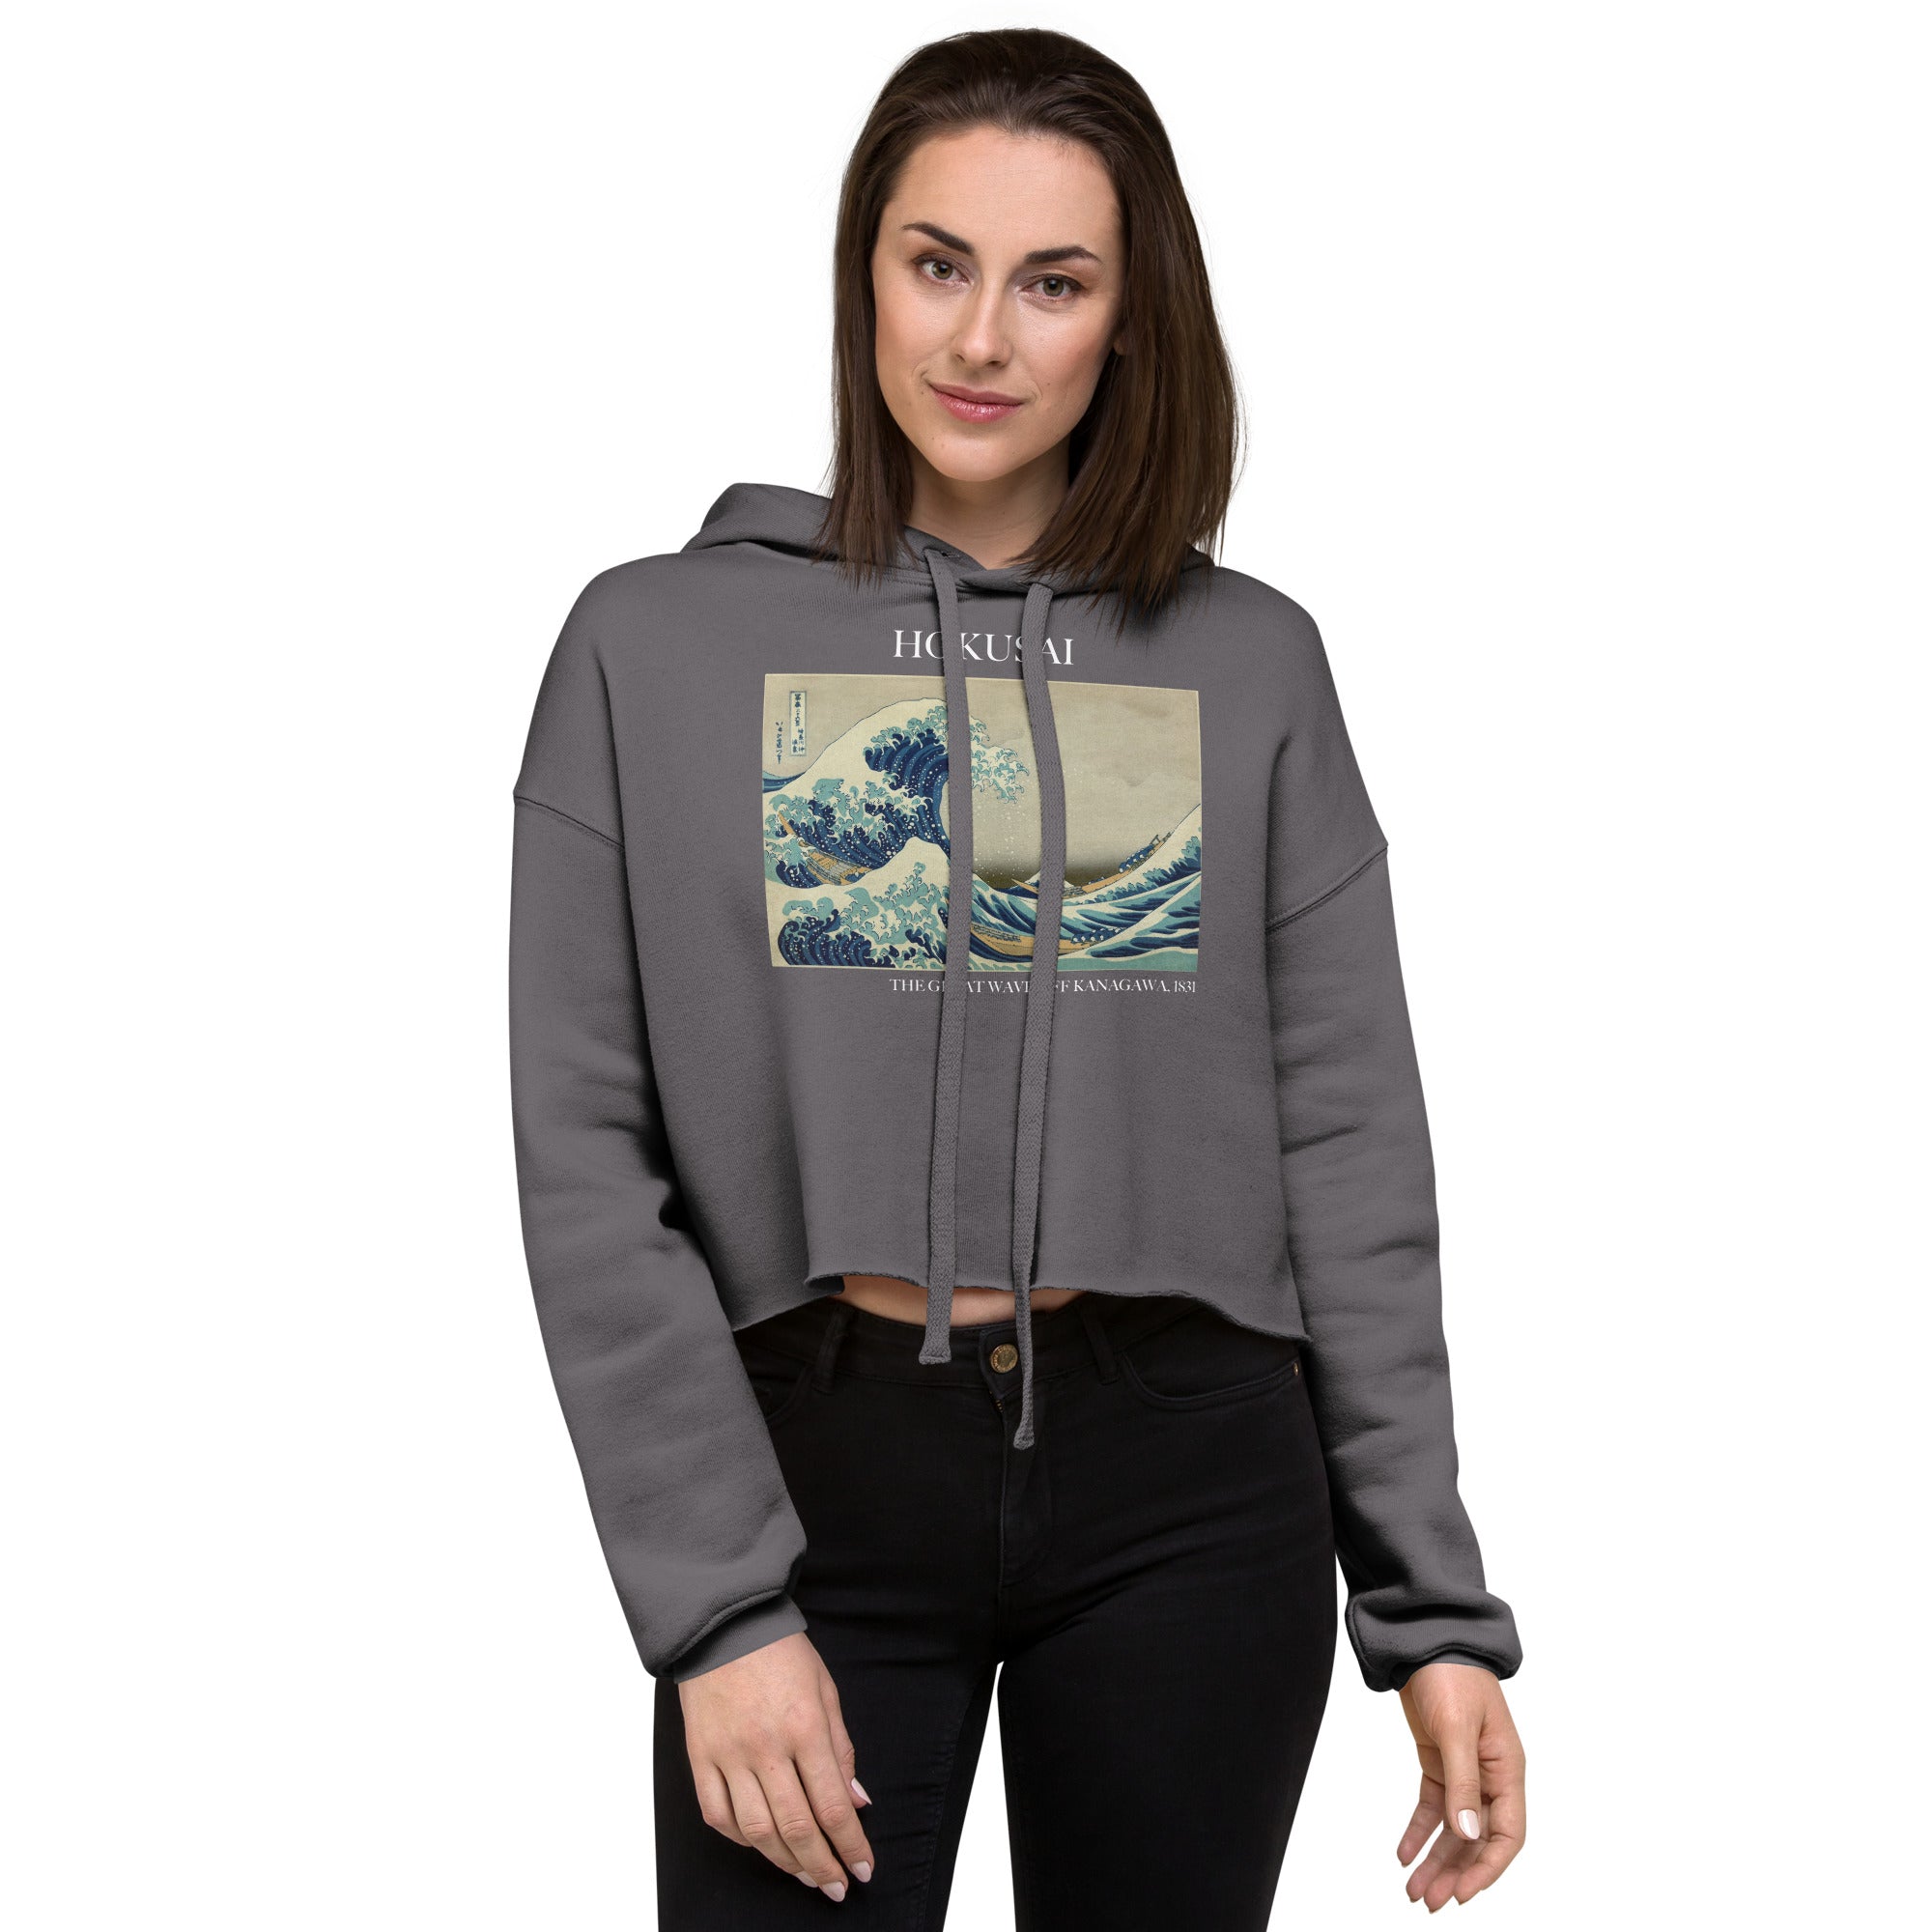 Hokusai 'The Great Wave off Kanagawa' Famous Painting Cropped Hoodie | Premium Art Cropped Hoodie